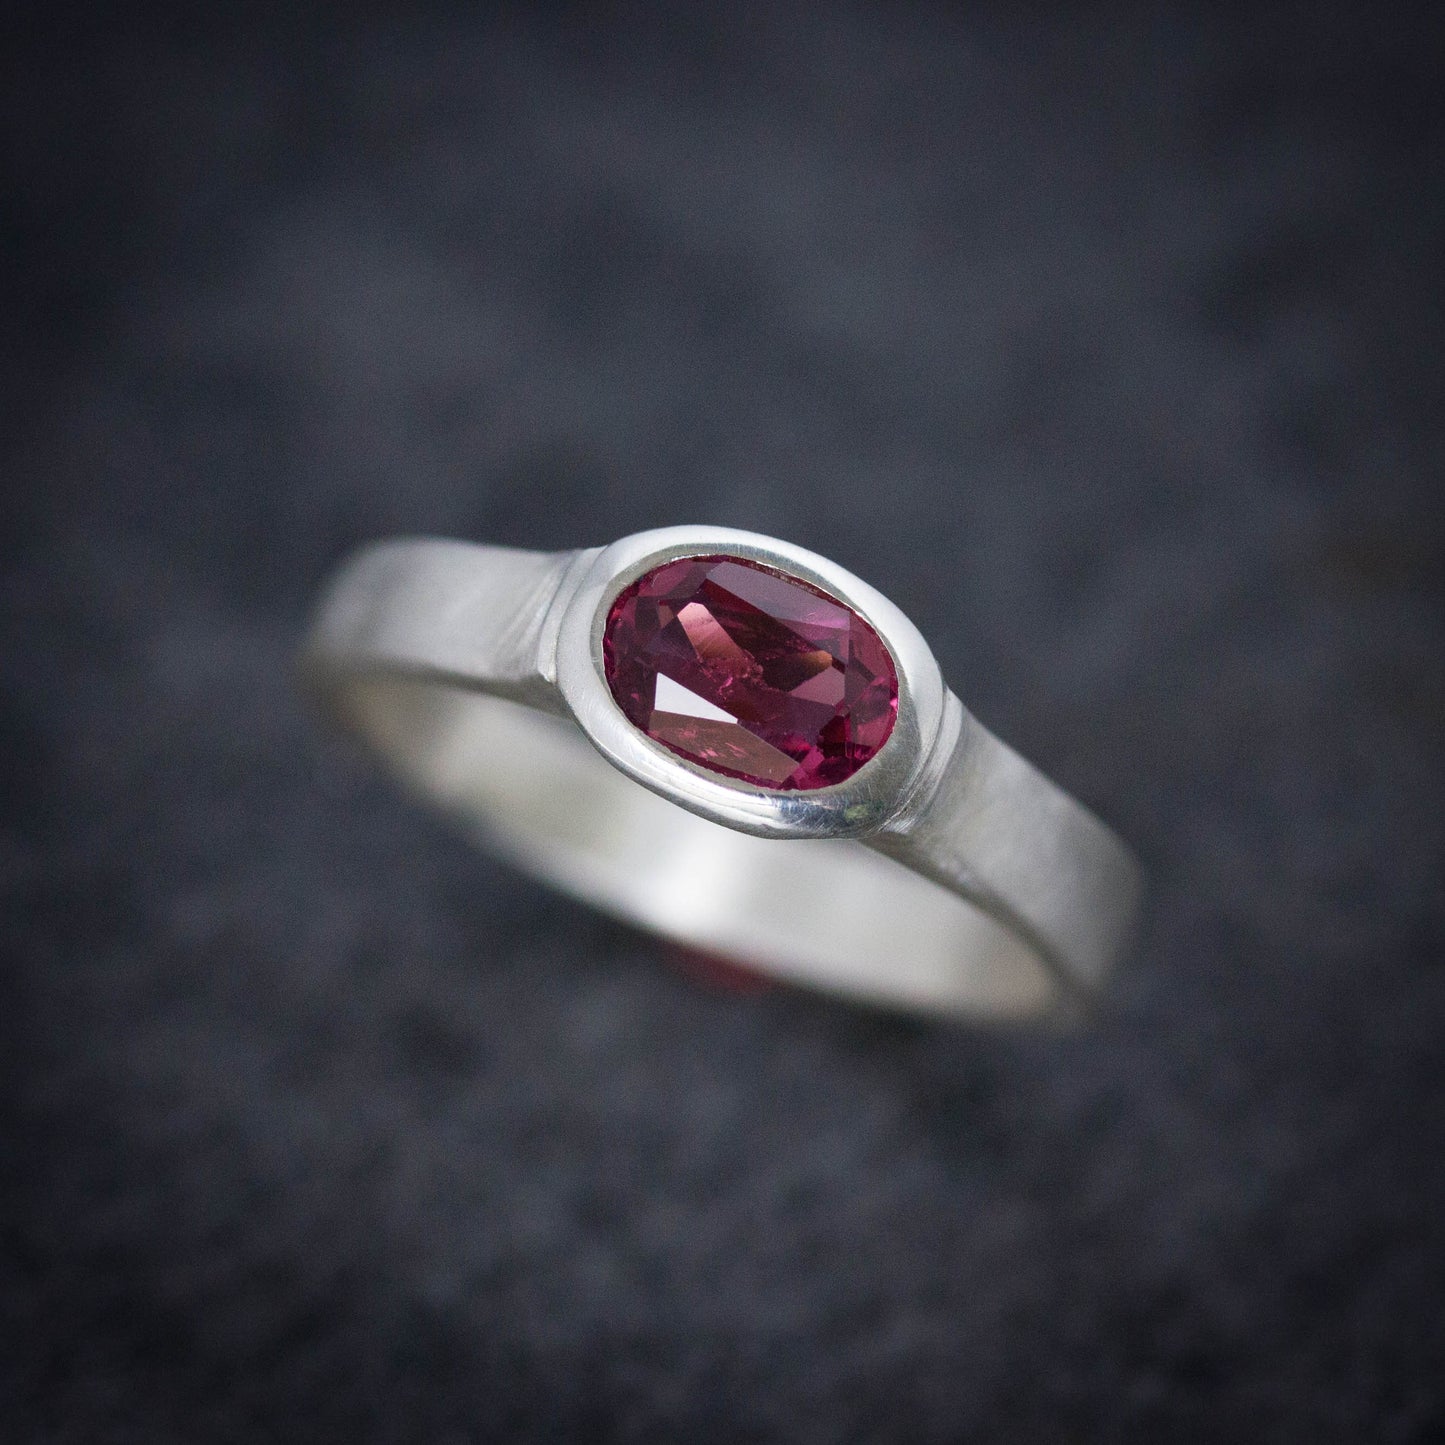 A Handmade Pink Tourmaline Wide Band Ring, Brushed Silver With Low Profile, Size 7 Oval Gemstone Solitaire and October Birthstone with a ruby stone by Cassin Jewelry.